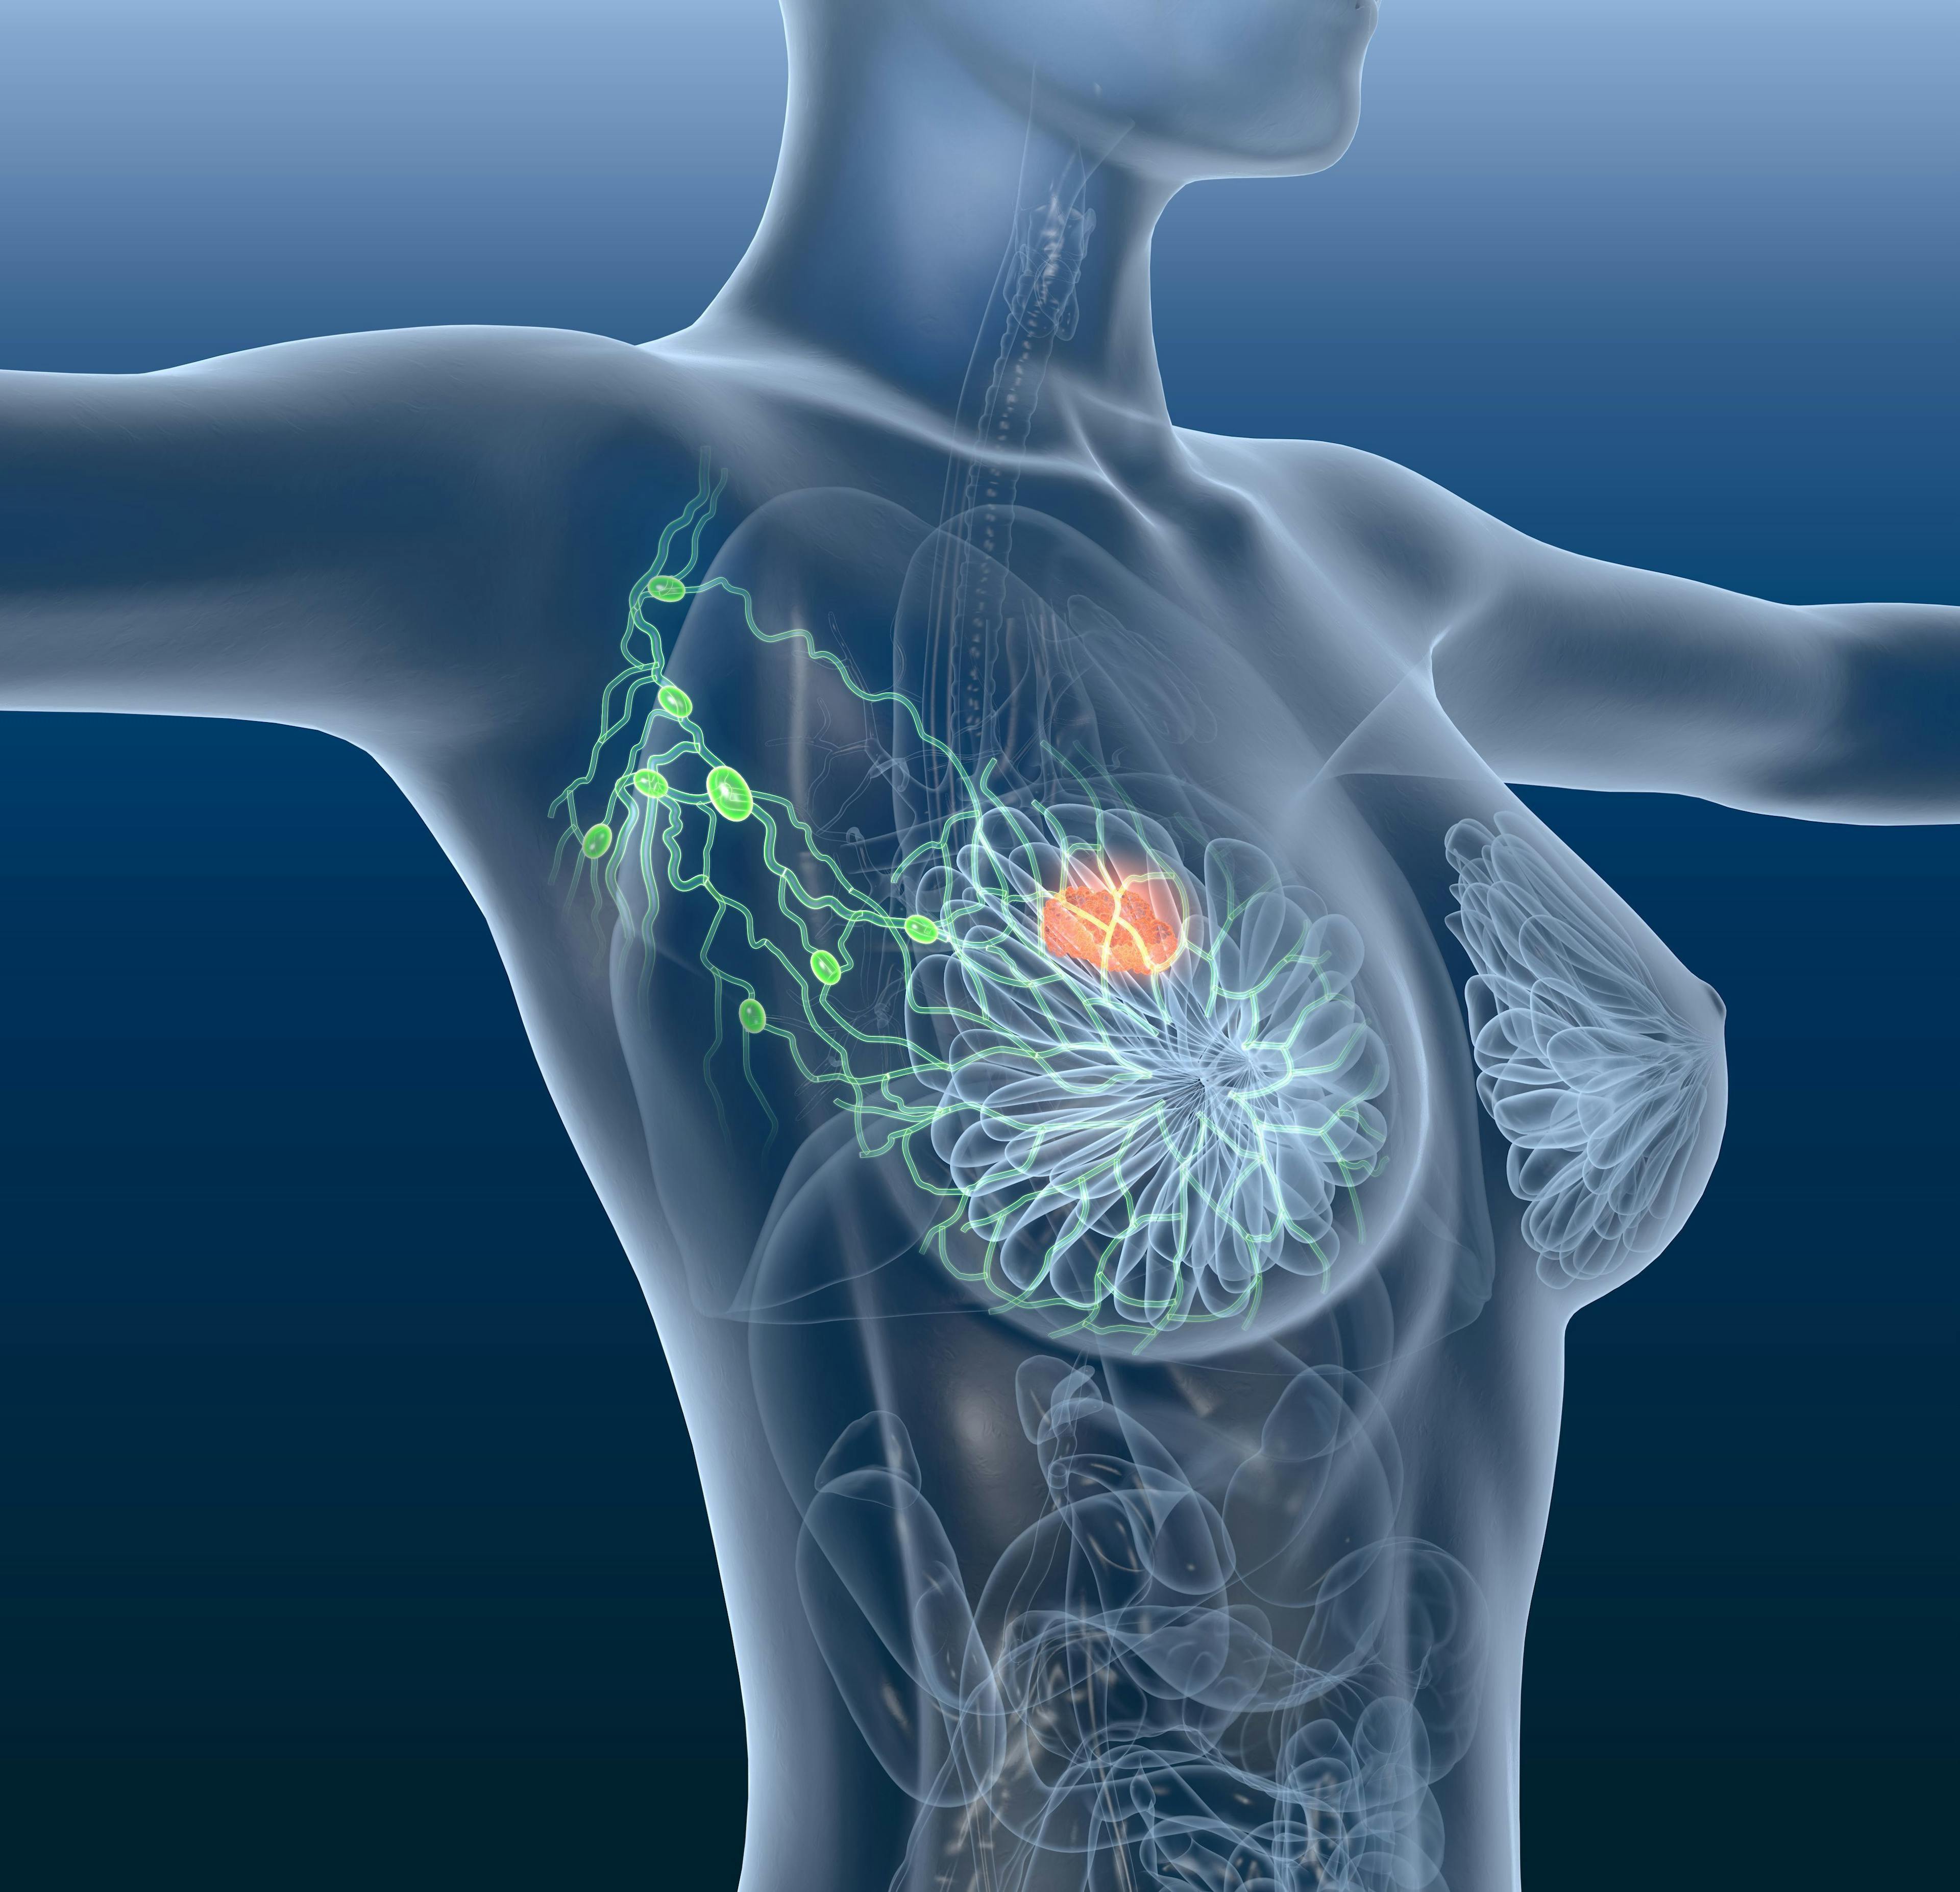 The investigational drug CFI-402257 alone and in combination with fulvestrant received fast track designation from the FDA for patients with estrogen receptor–positive, HER2-negative advanced breast cancer.